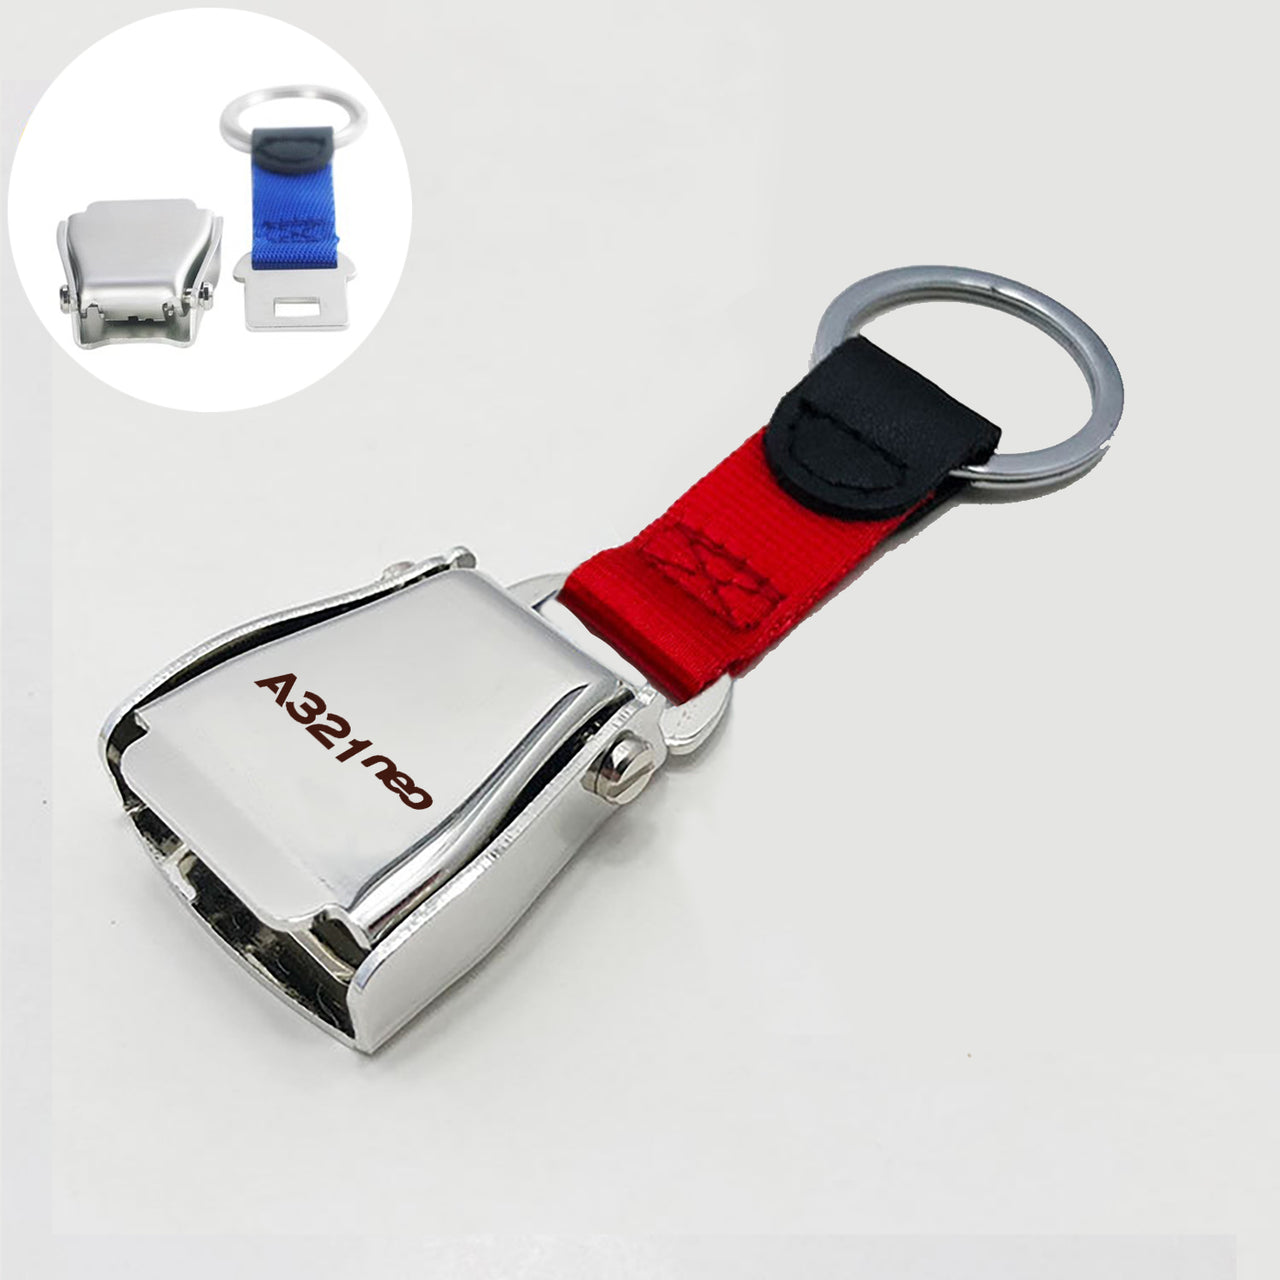 A321neo & Text Designed Airplane Seat Belt Key Chains